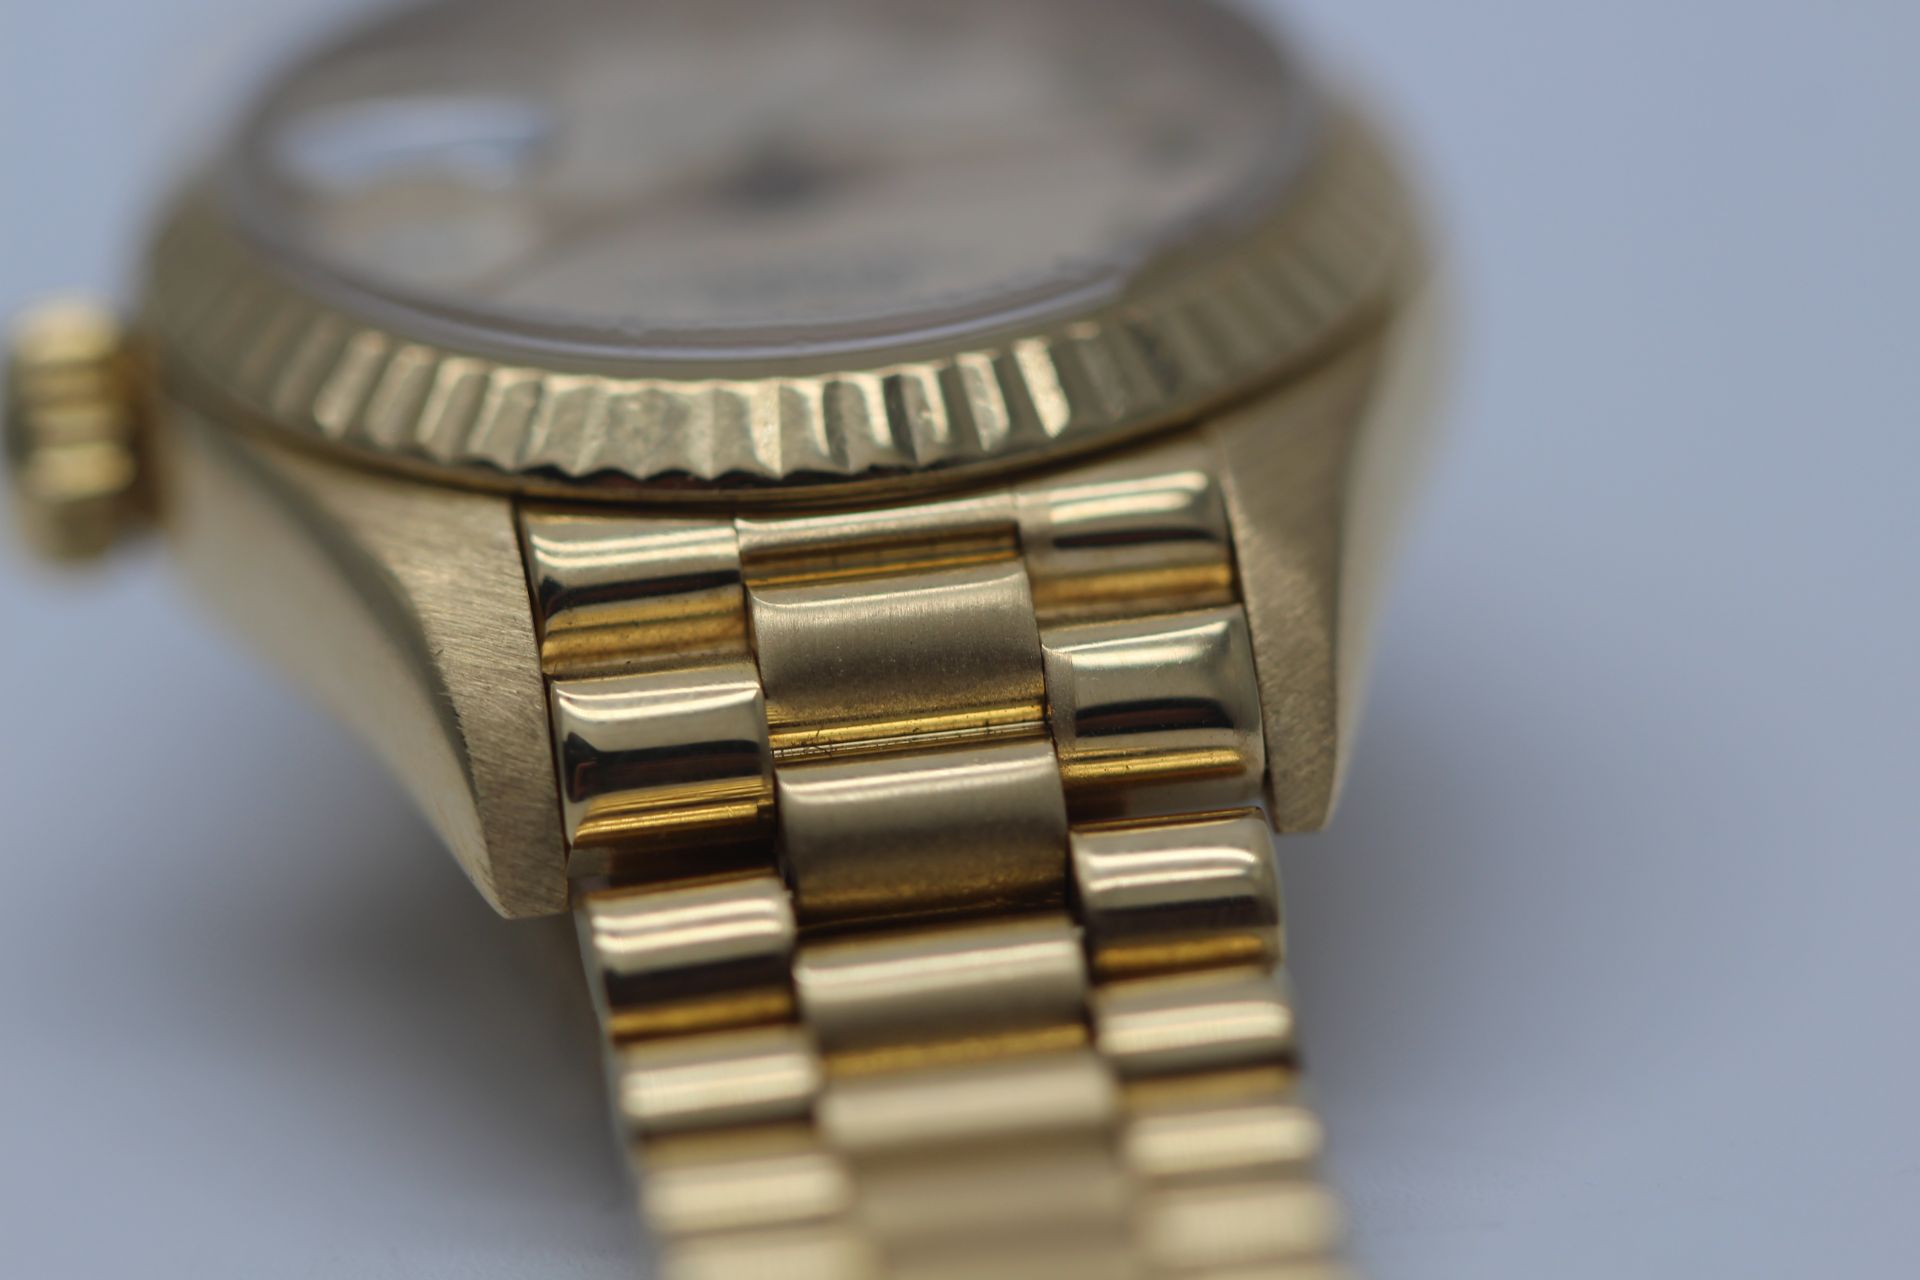 ROLEX, LADIES 18CT GOLD DATEJUST SET WITH CREME DIAL - Image 8 of 9